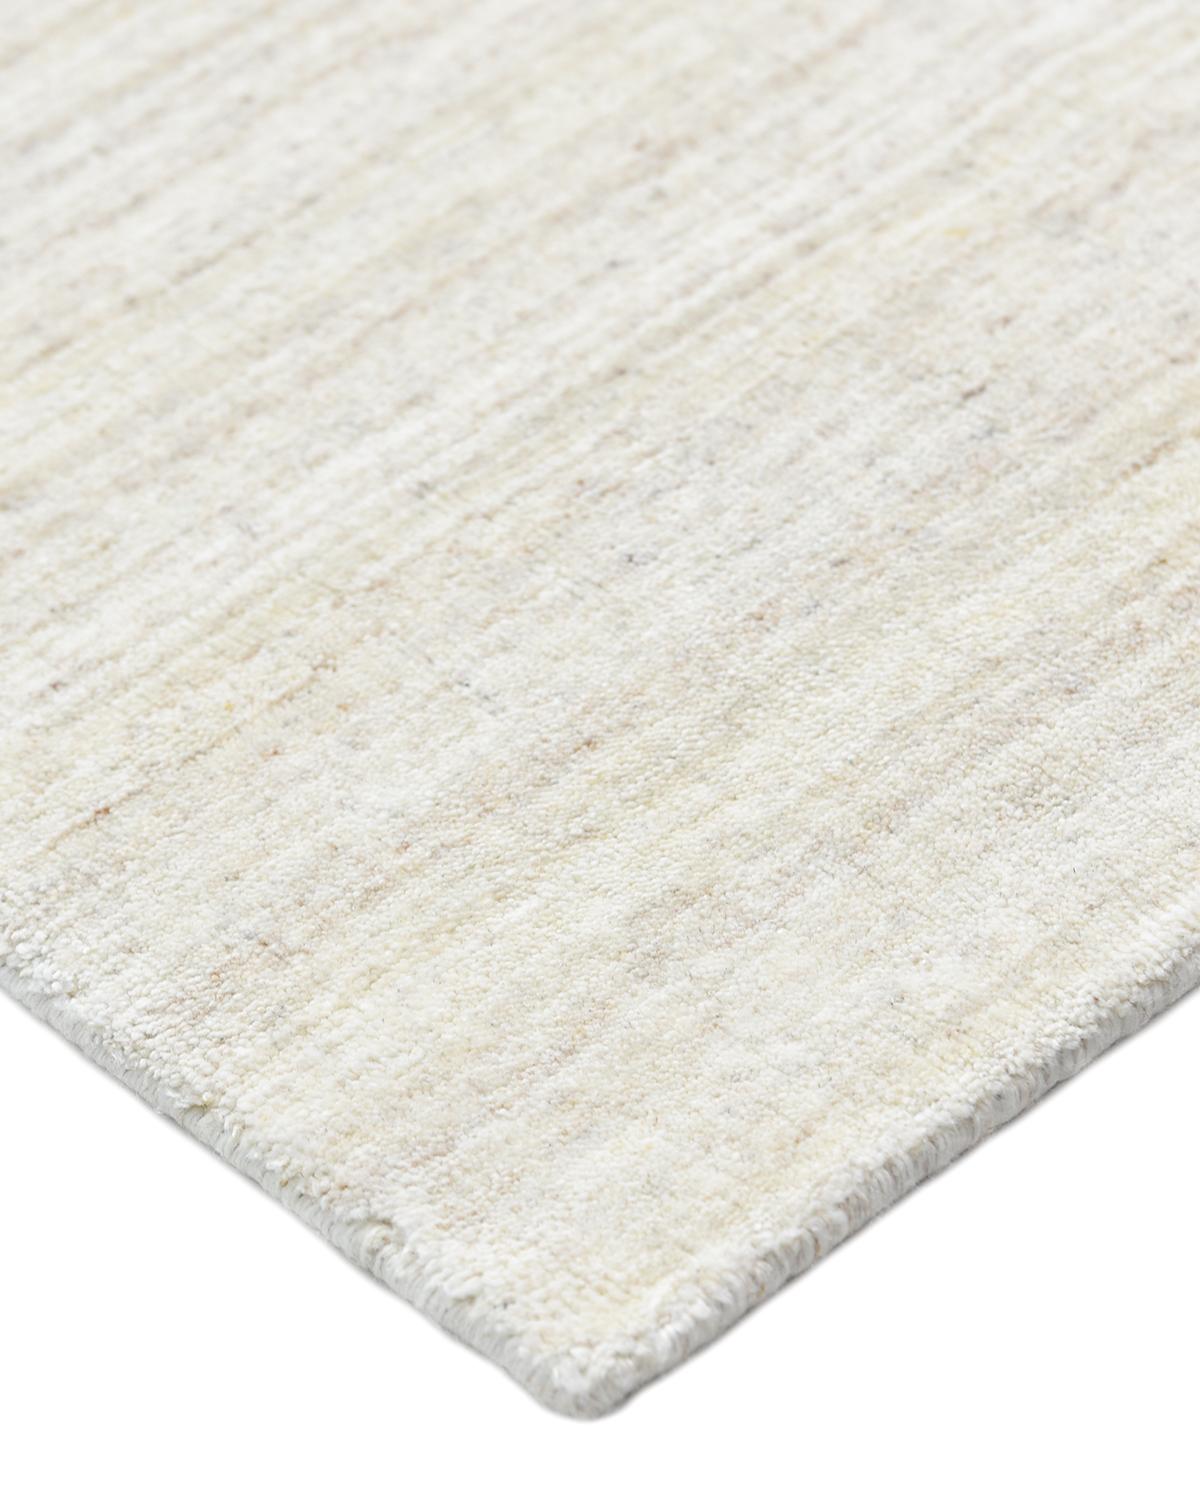 Subtle tone-on-tone stripes give the solid collection a depth and sophistication all its own. These rugs can pull the disparate elements of a room into a beautifully cohesive whole; they can also introduce an unexpected but welcome jolt of color